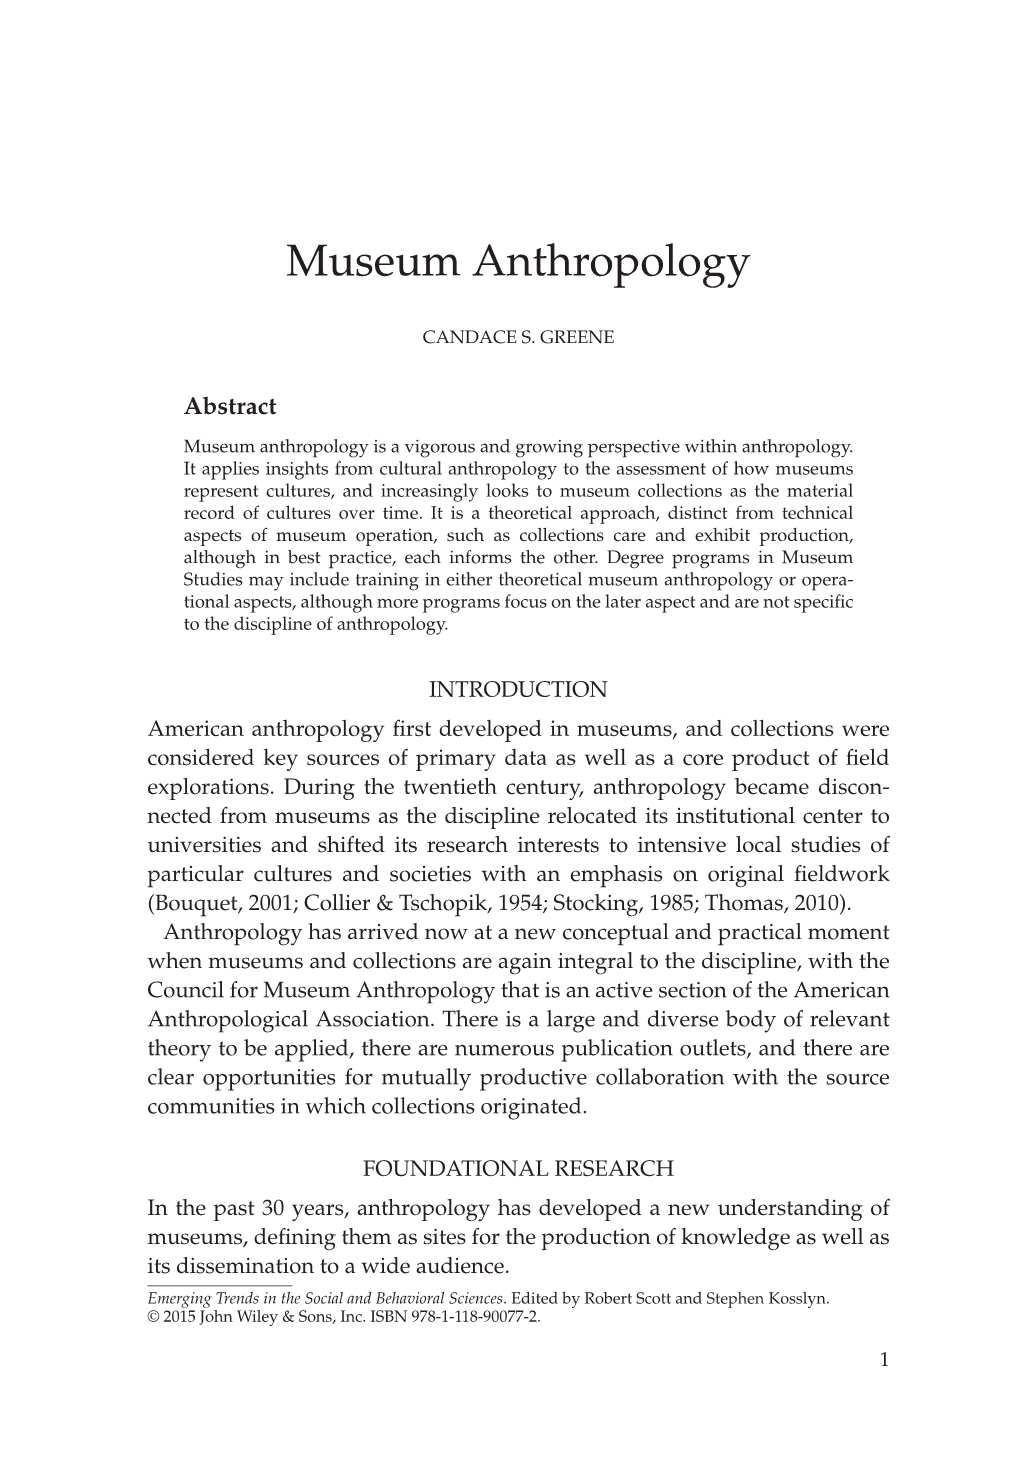 "Museum Anthropology" In: Emerging Trends in the Social and Behavioral